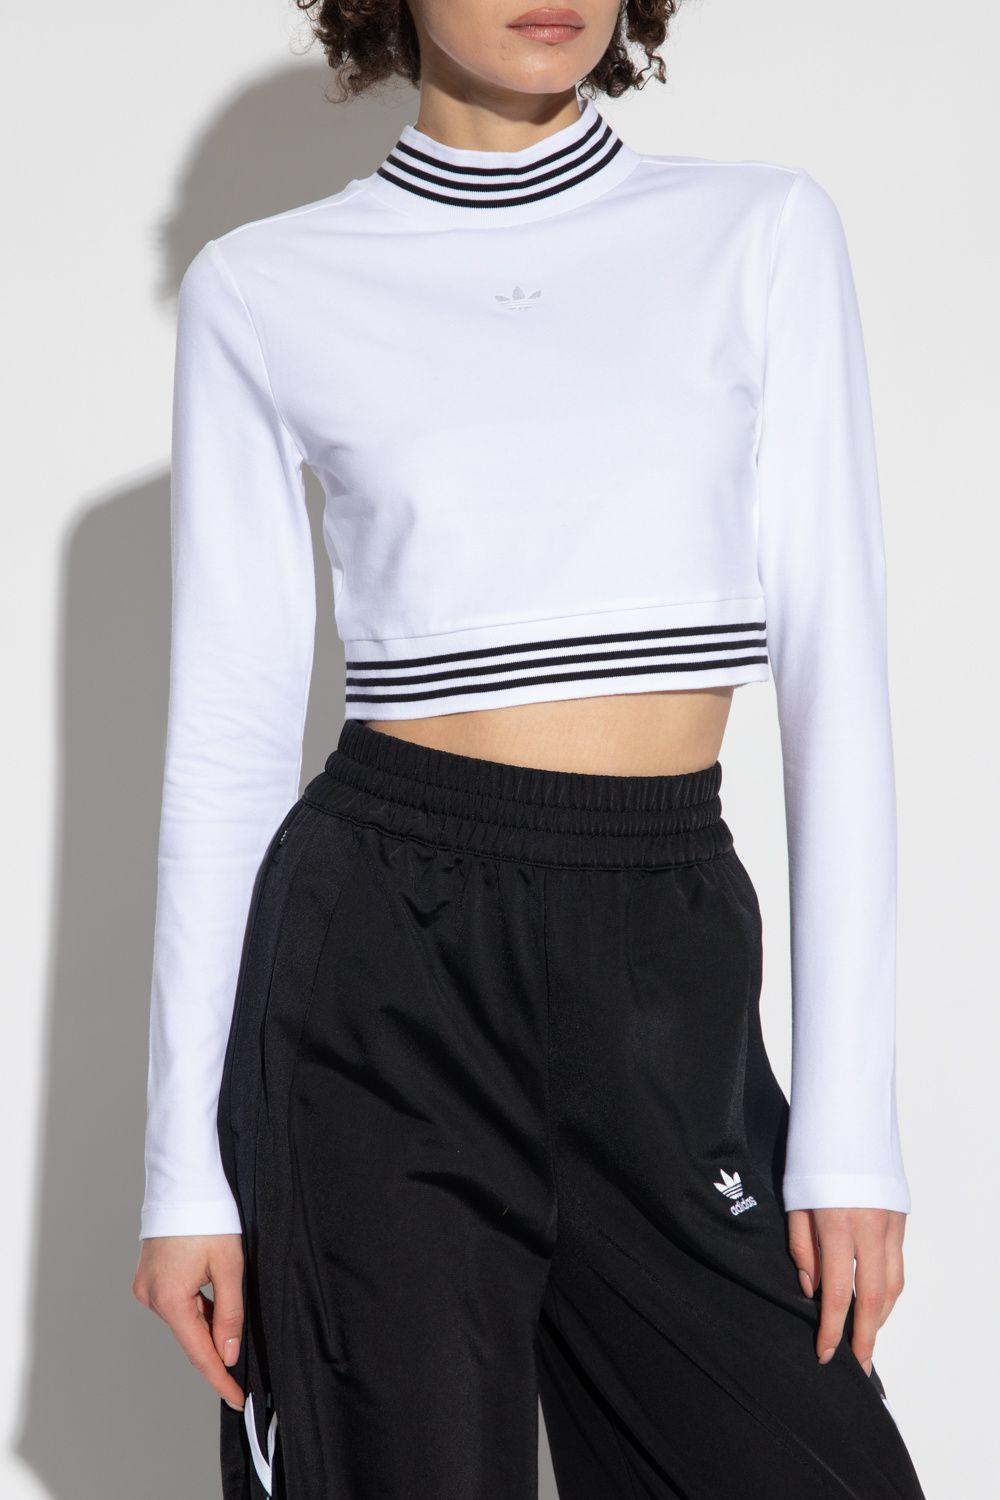 adidas Originals Cropped Top in White | Lyst